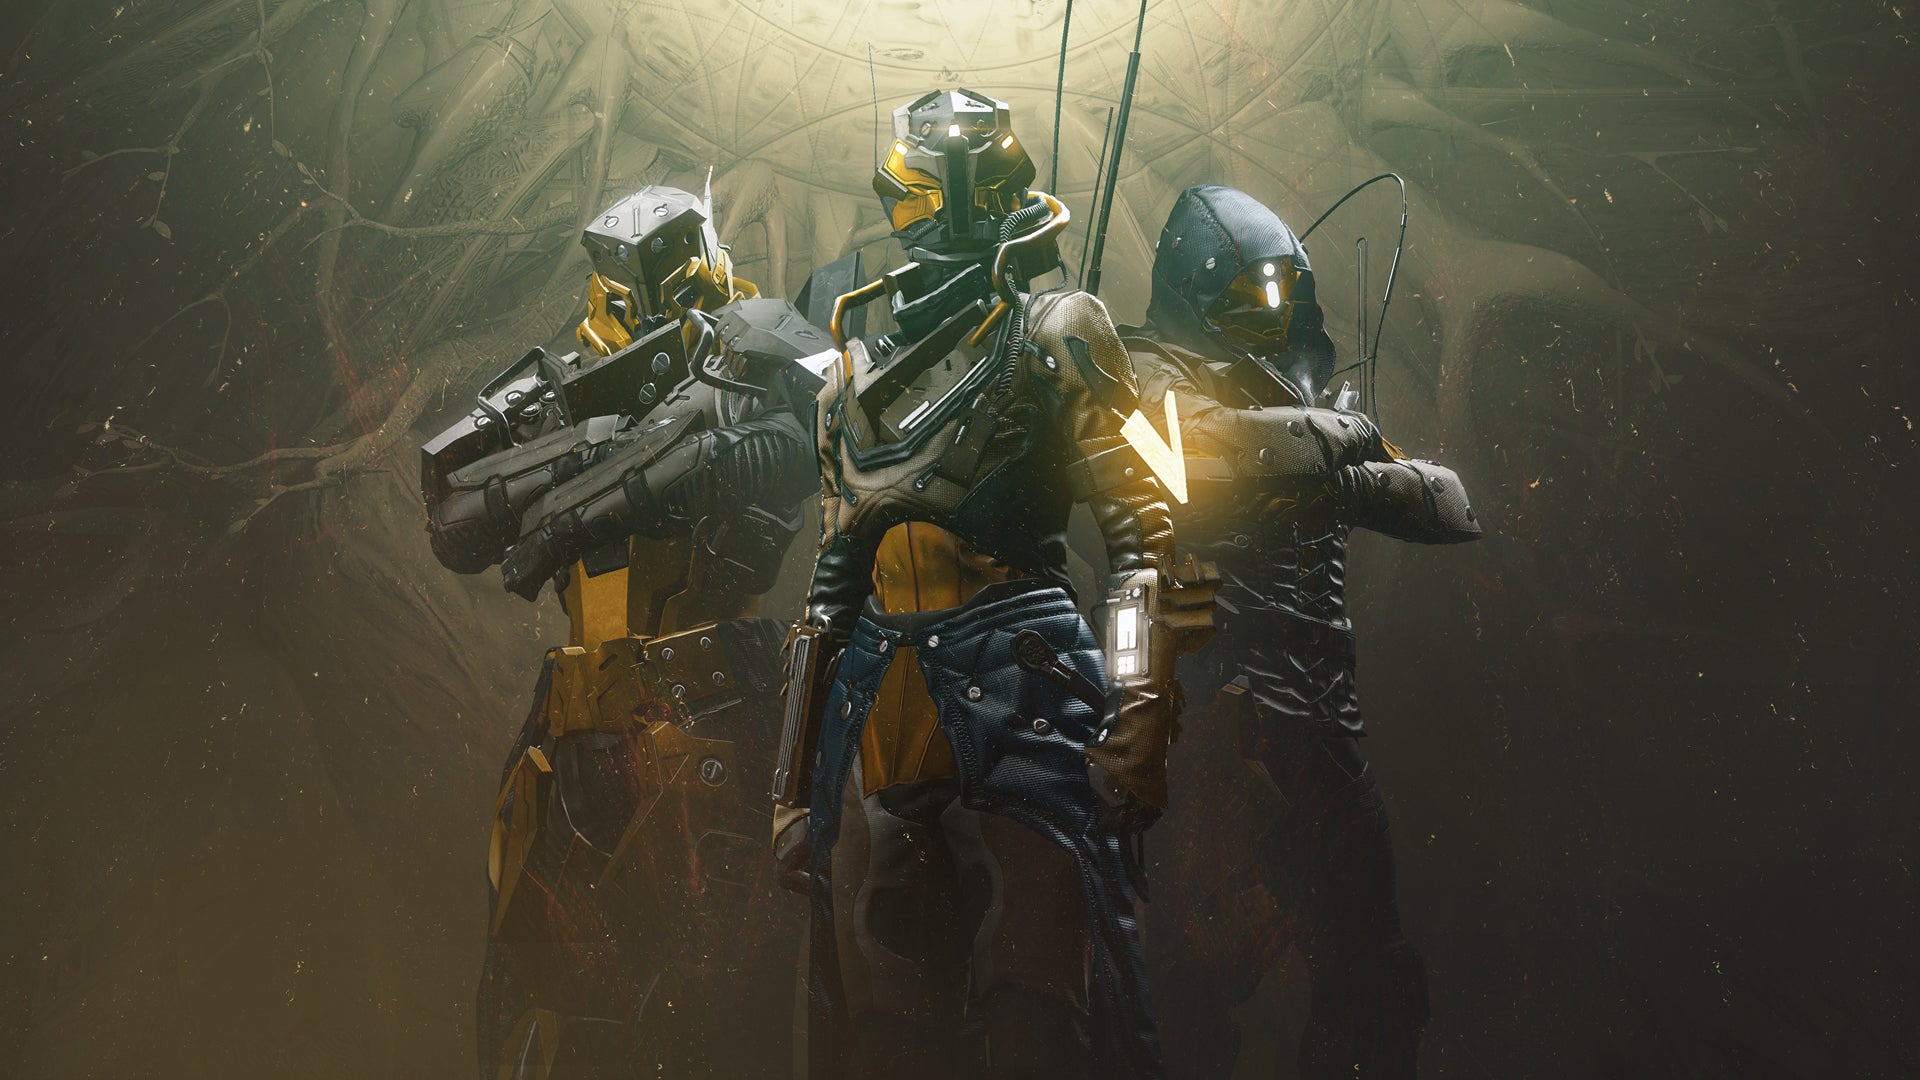 Image for Destiny 2 - Season of Arrivals Roadmap: Prophecy Dungeon, Witherhoard Exotic Grenade Launcher and more